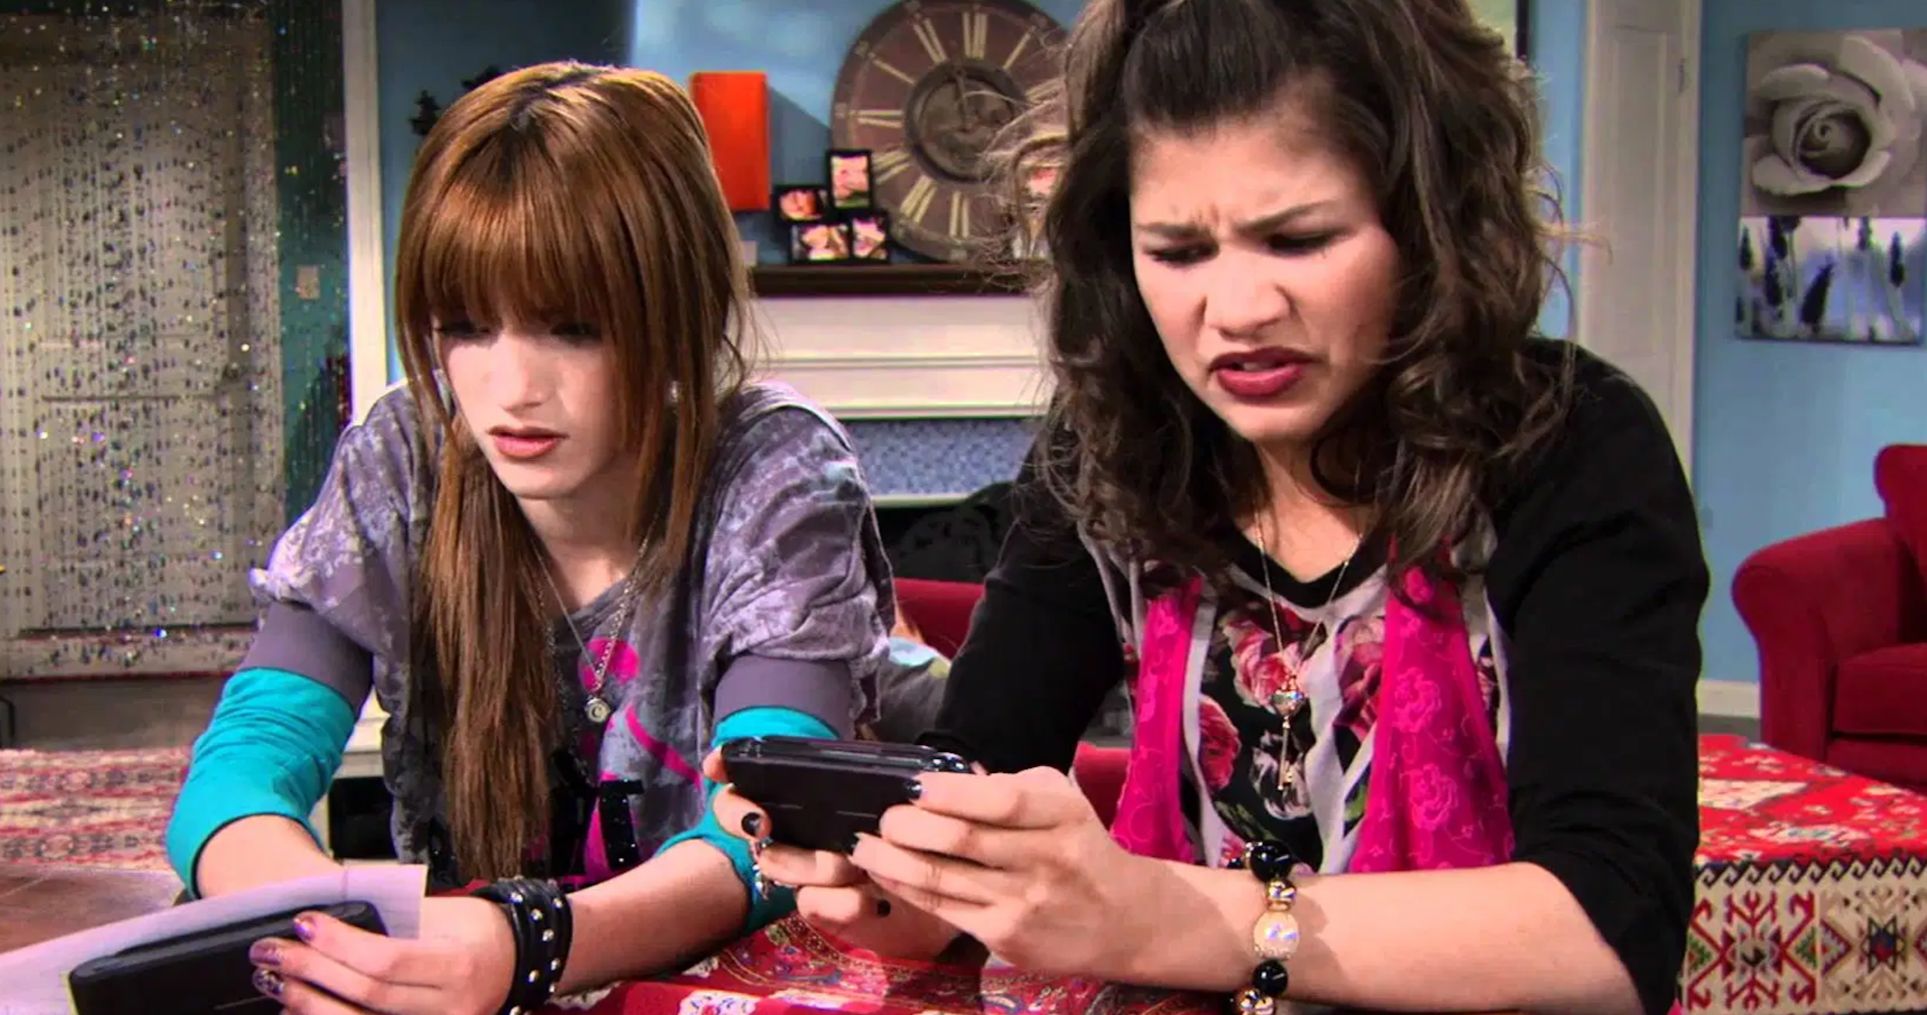 Bella Thorne Hates Being Pitted Against Zendaya: Why Are You Doing This?